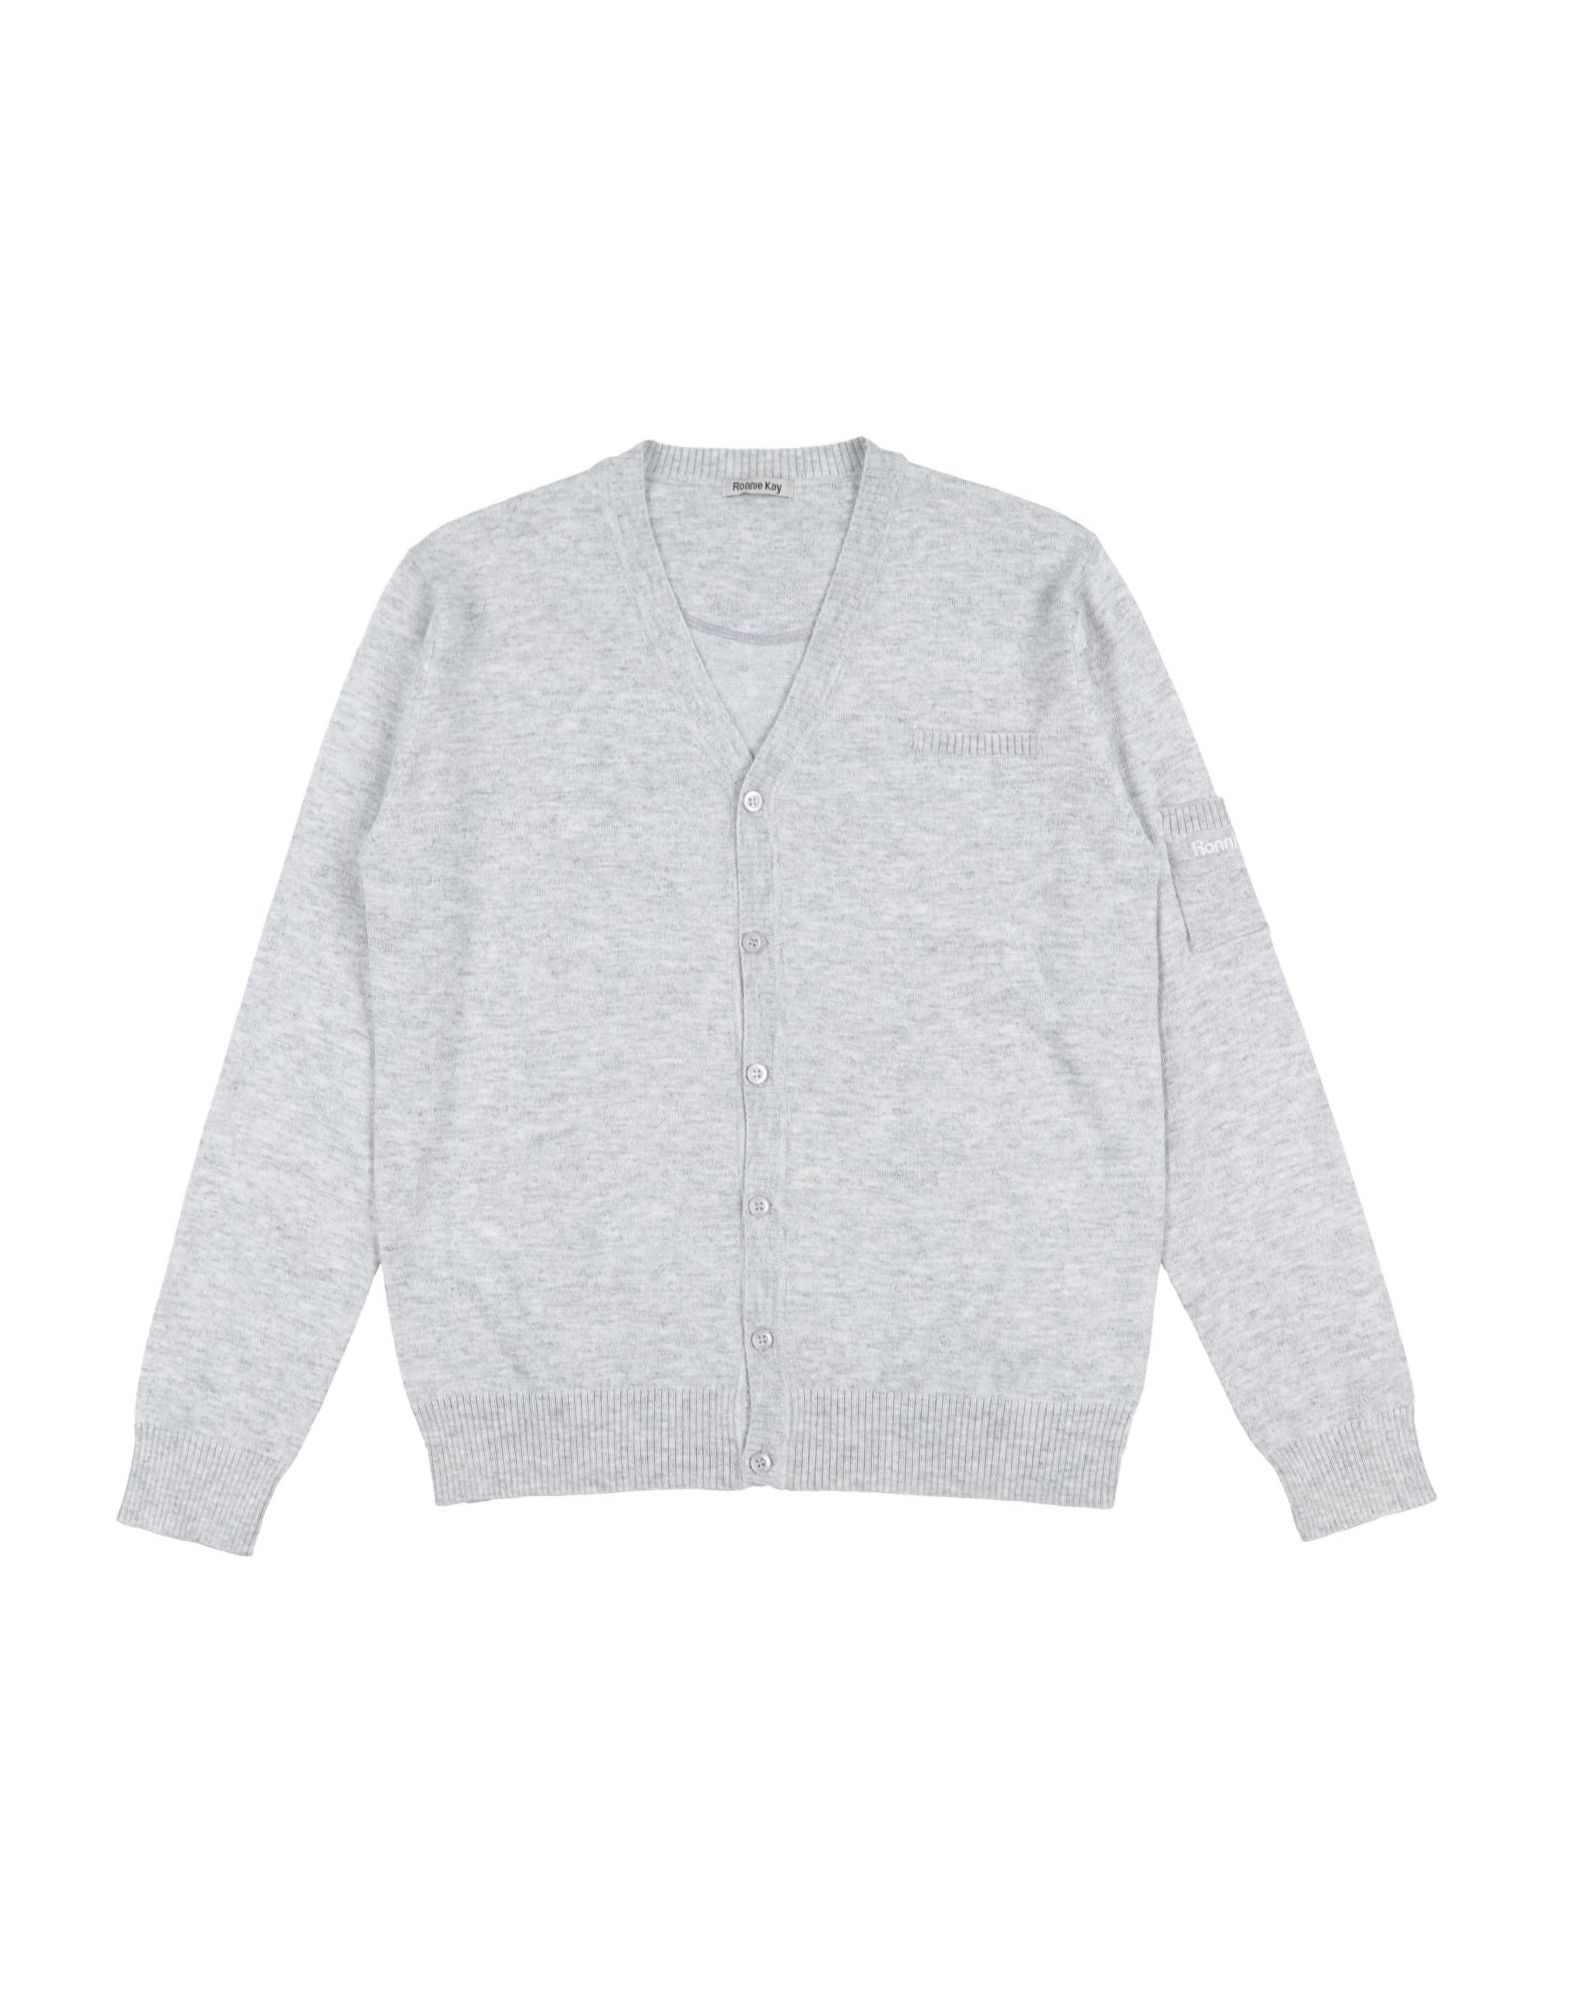 Ronnie Kay Kids' Cardigans In Light Grey